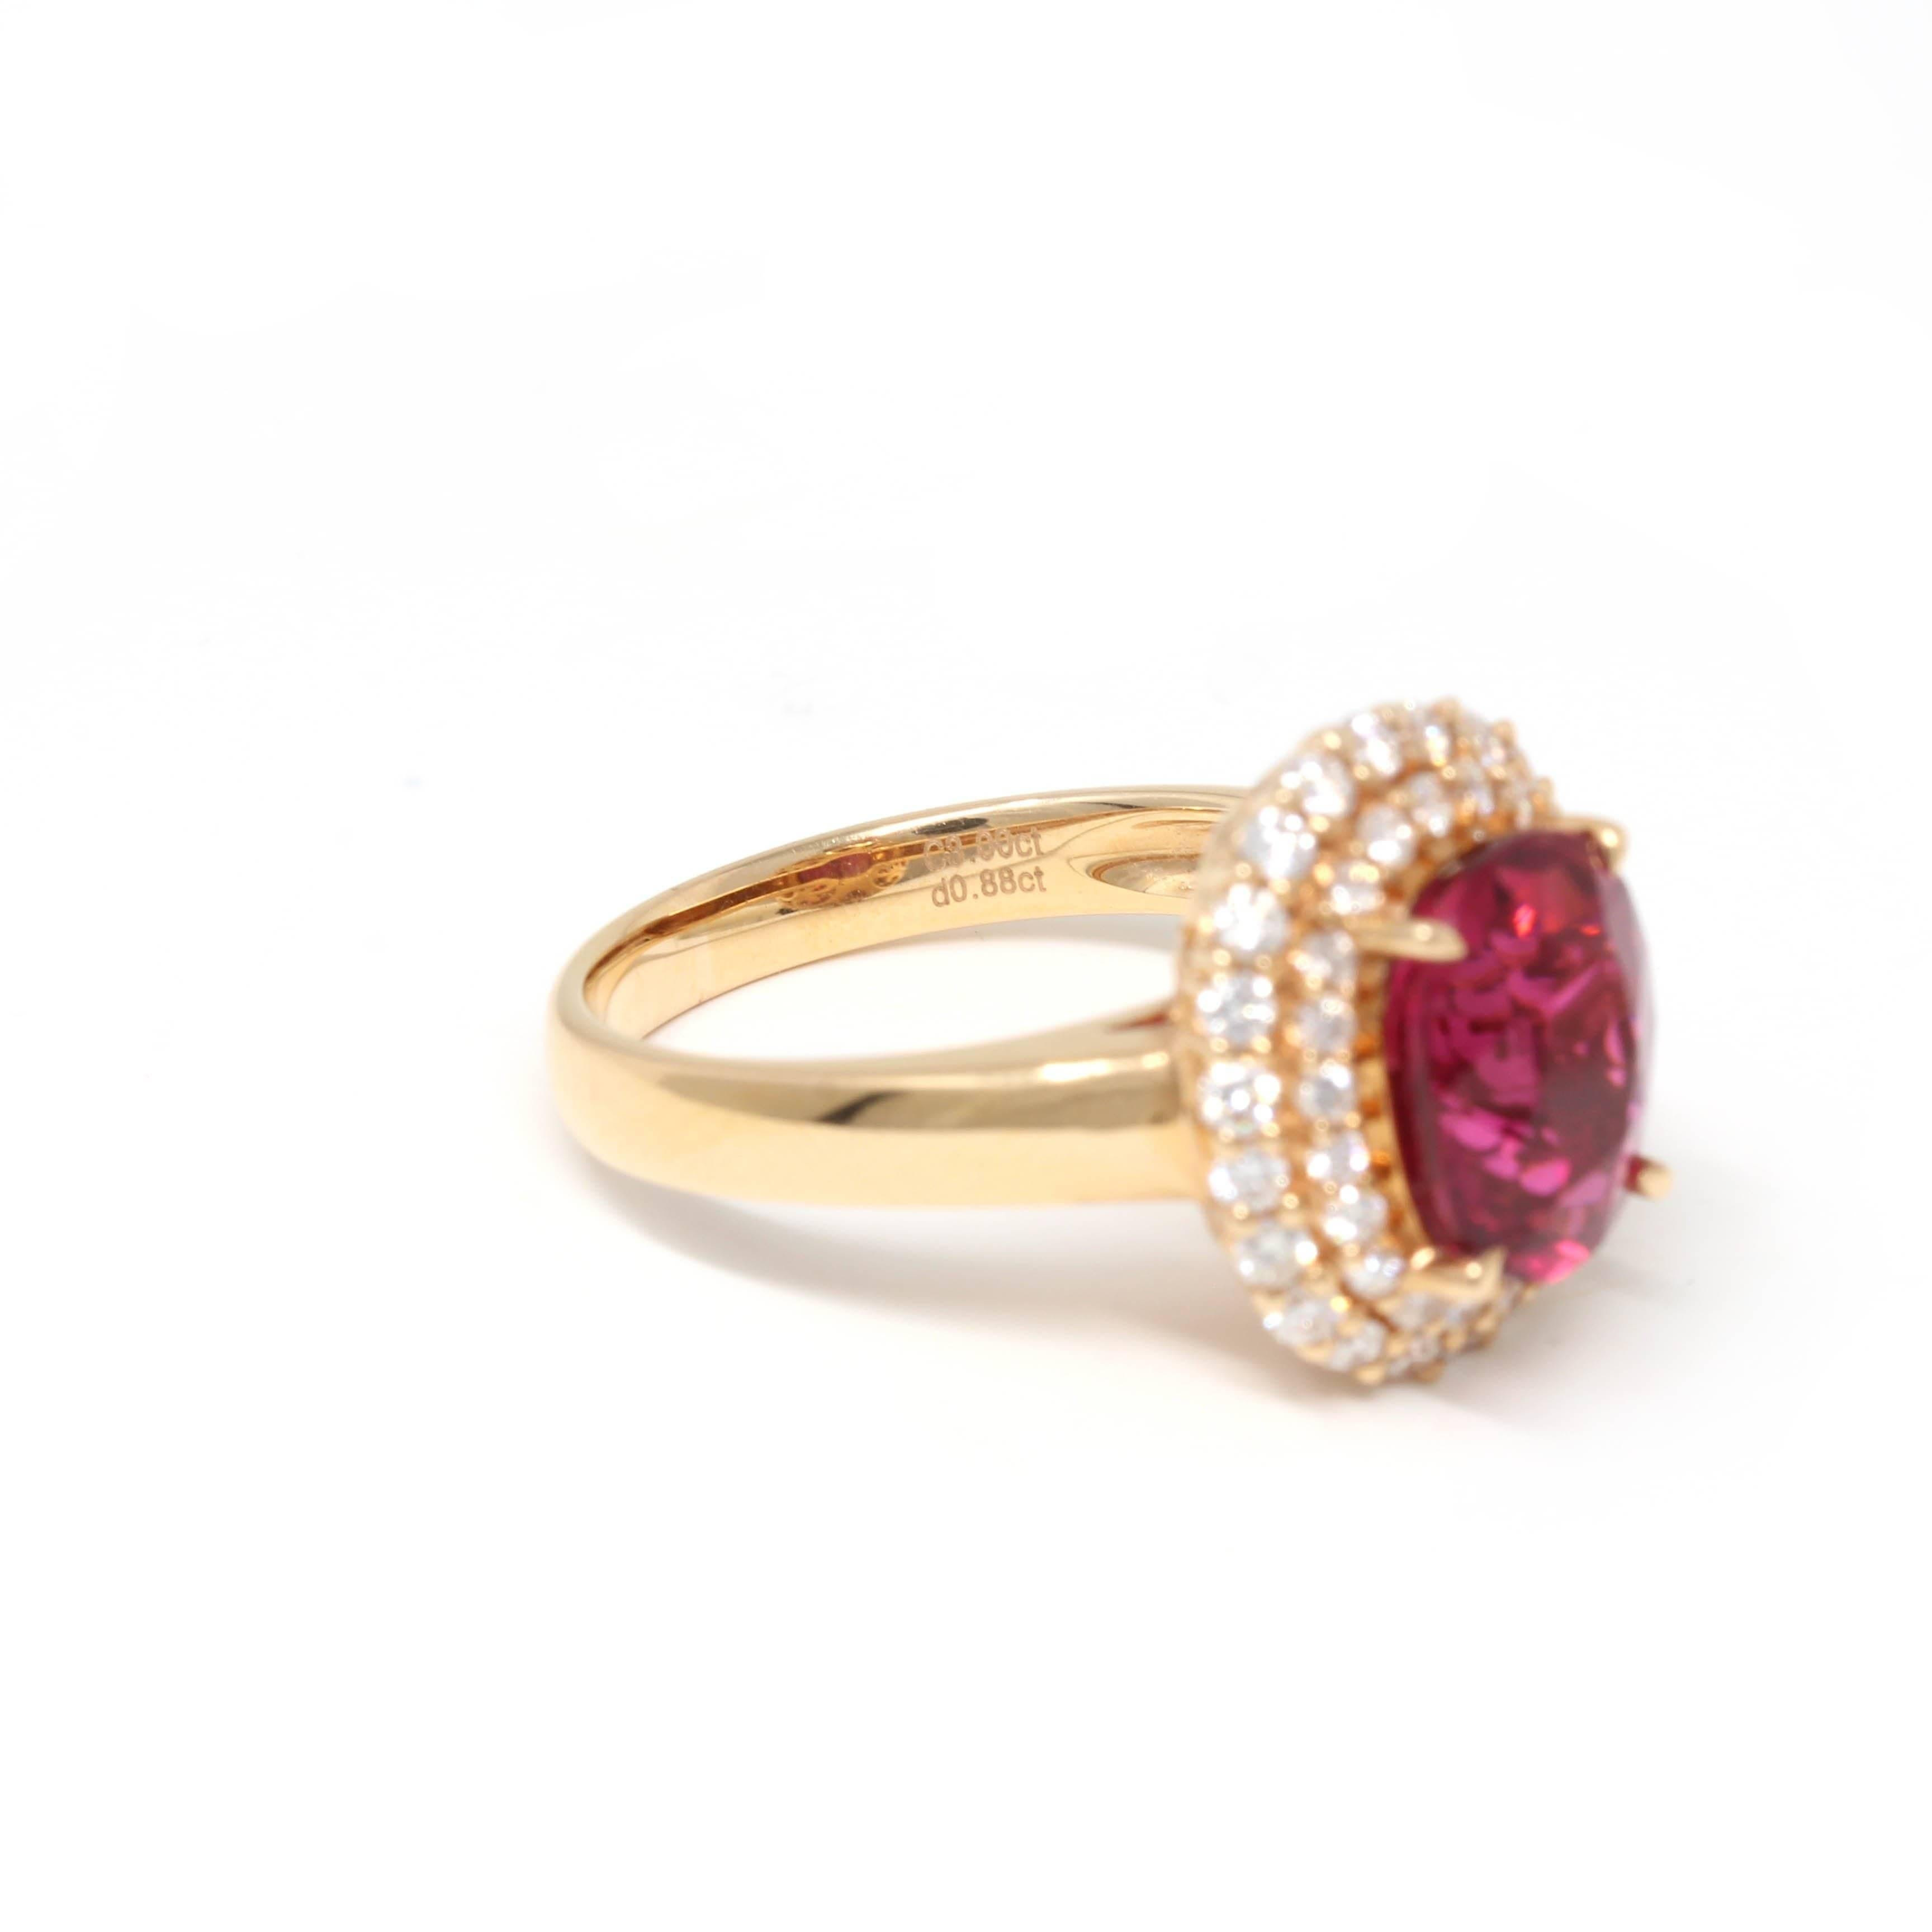 * Design Concept--- This ring features an oval natural Sri Lanka 3.0 ct Red Tourmaline the color is matched by a high-quality ruby. The design is classic yet elegant. The ring looks very exquisite with 0.88 ct diamonds halo. Baikalla artisans are